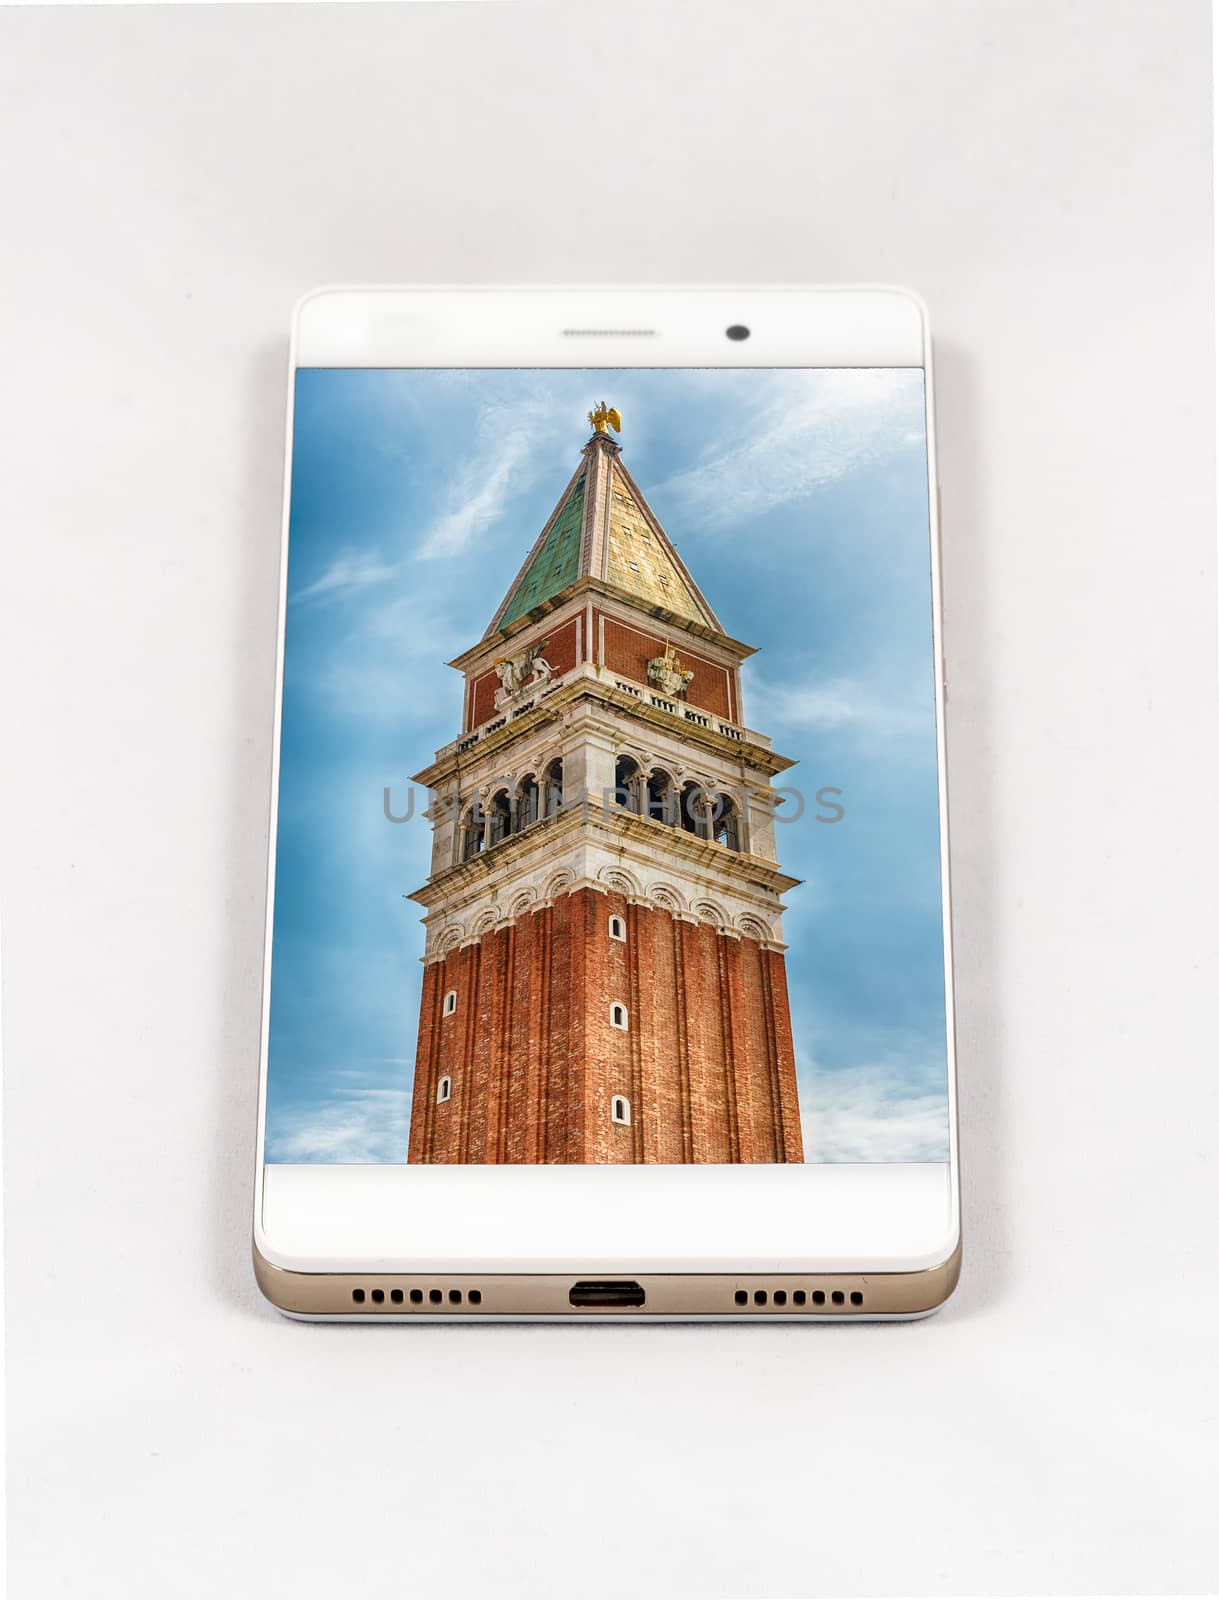 Modern smartphone with full screen picture of Venice, Italy. Concept for travel smartphone photography. All images in this composition are made by me and separately available on my portfolio